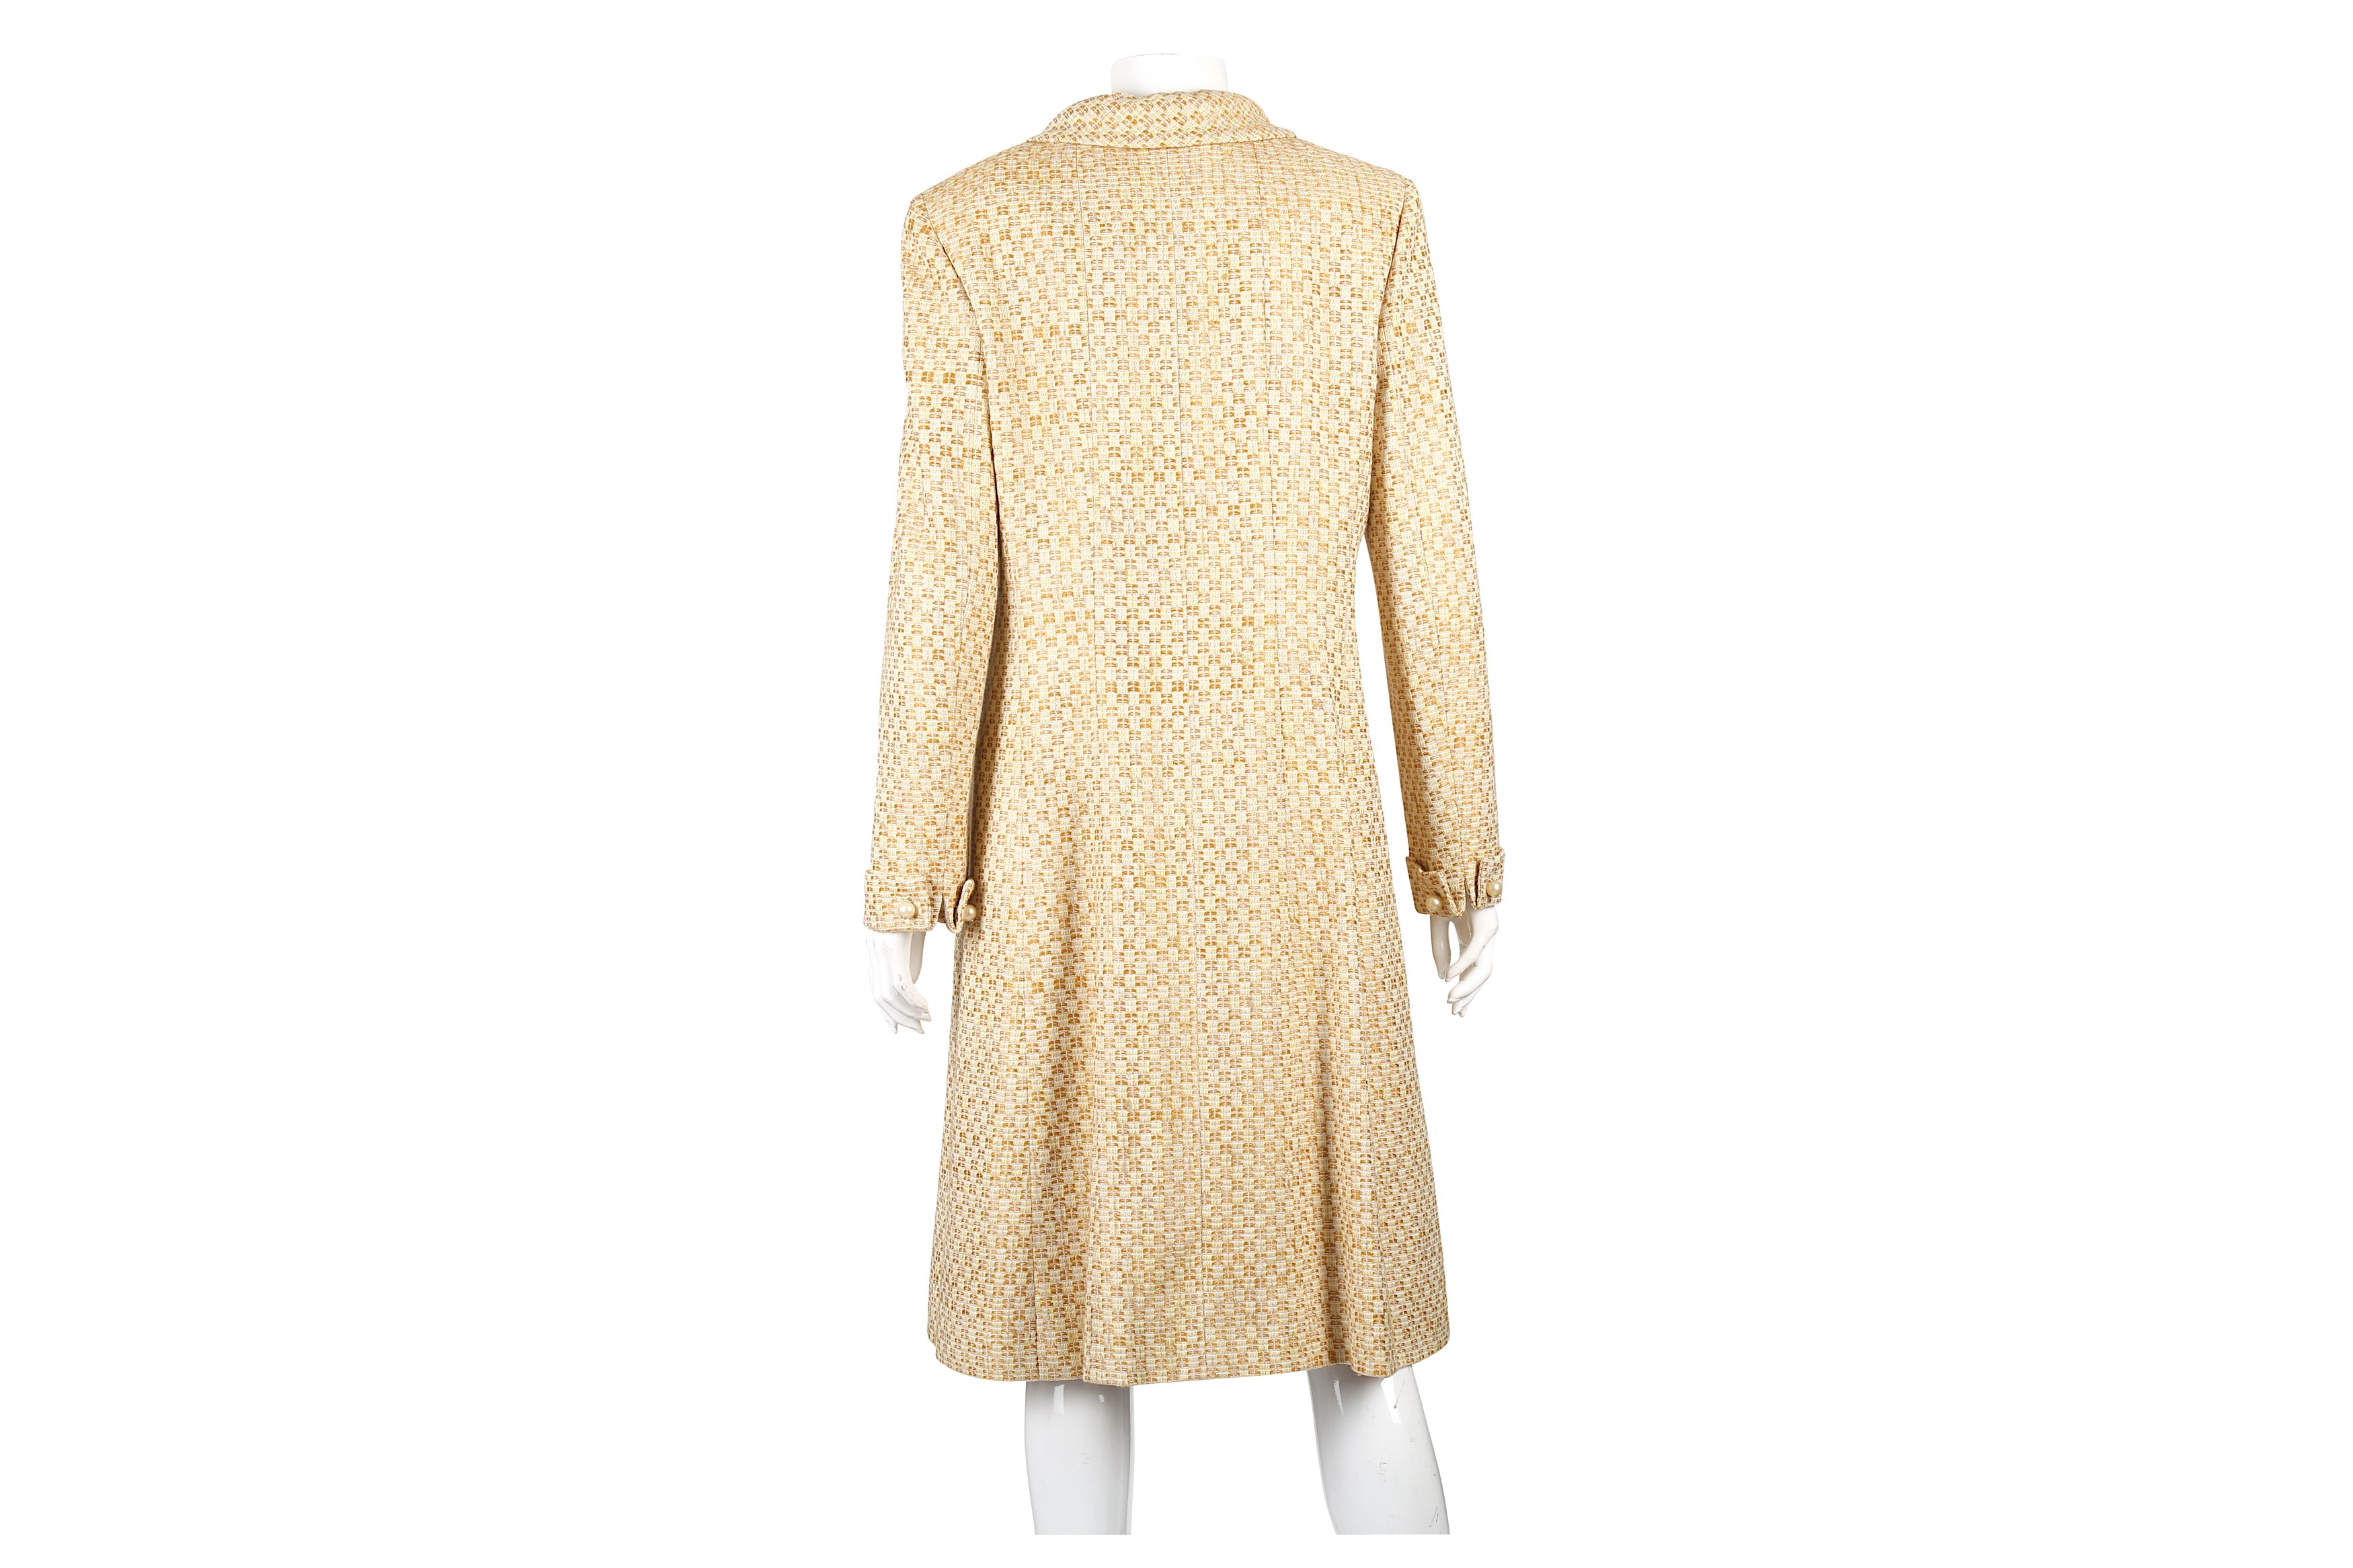 Chanel Honey Tweed Dress and Coat Suit - Size 42 - Image 4 of 8